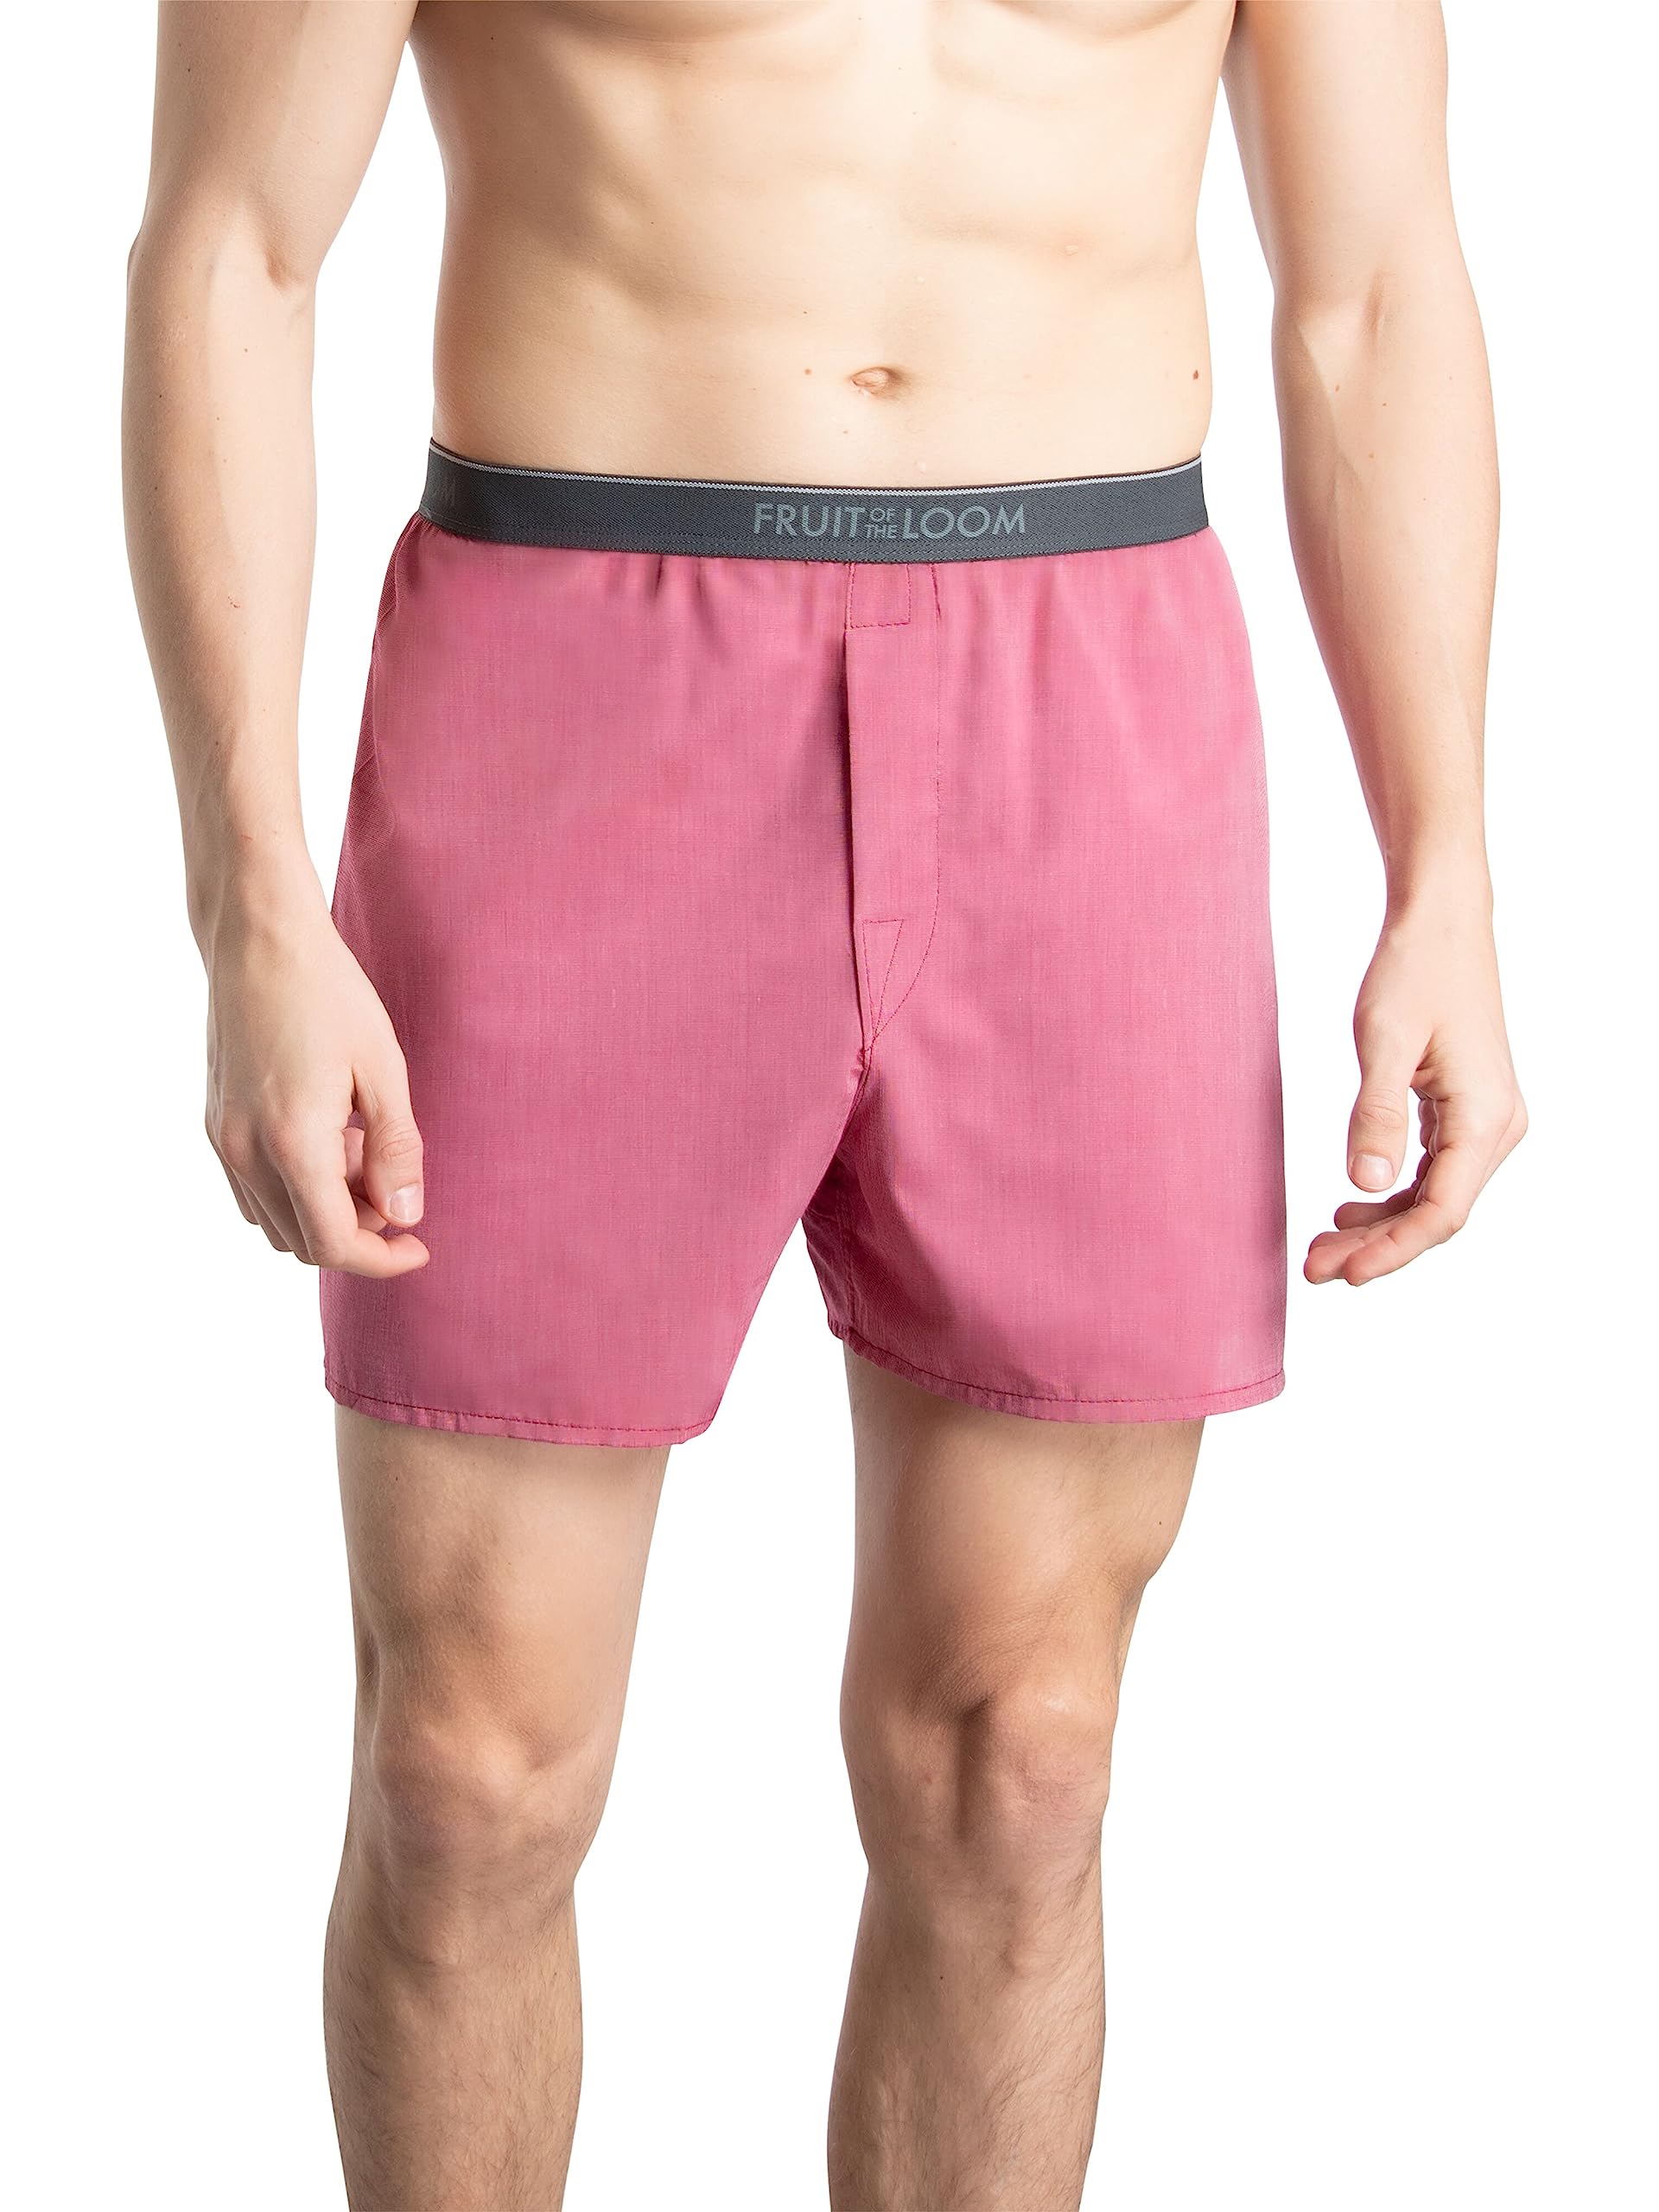 Fruit of the Loom mens Tag-free Boxer Shorts (Knit & Woven)